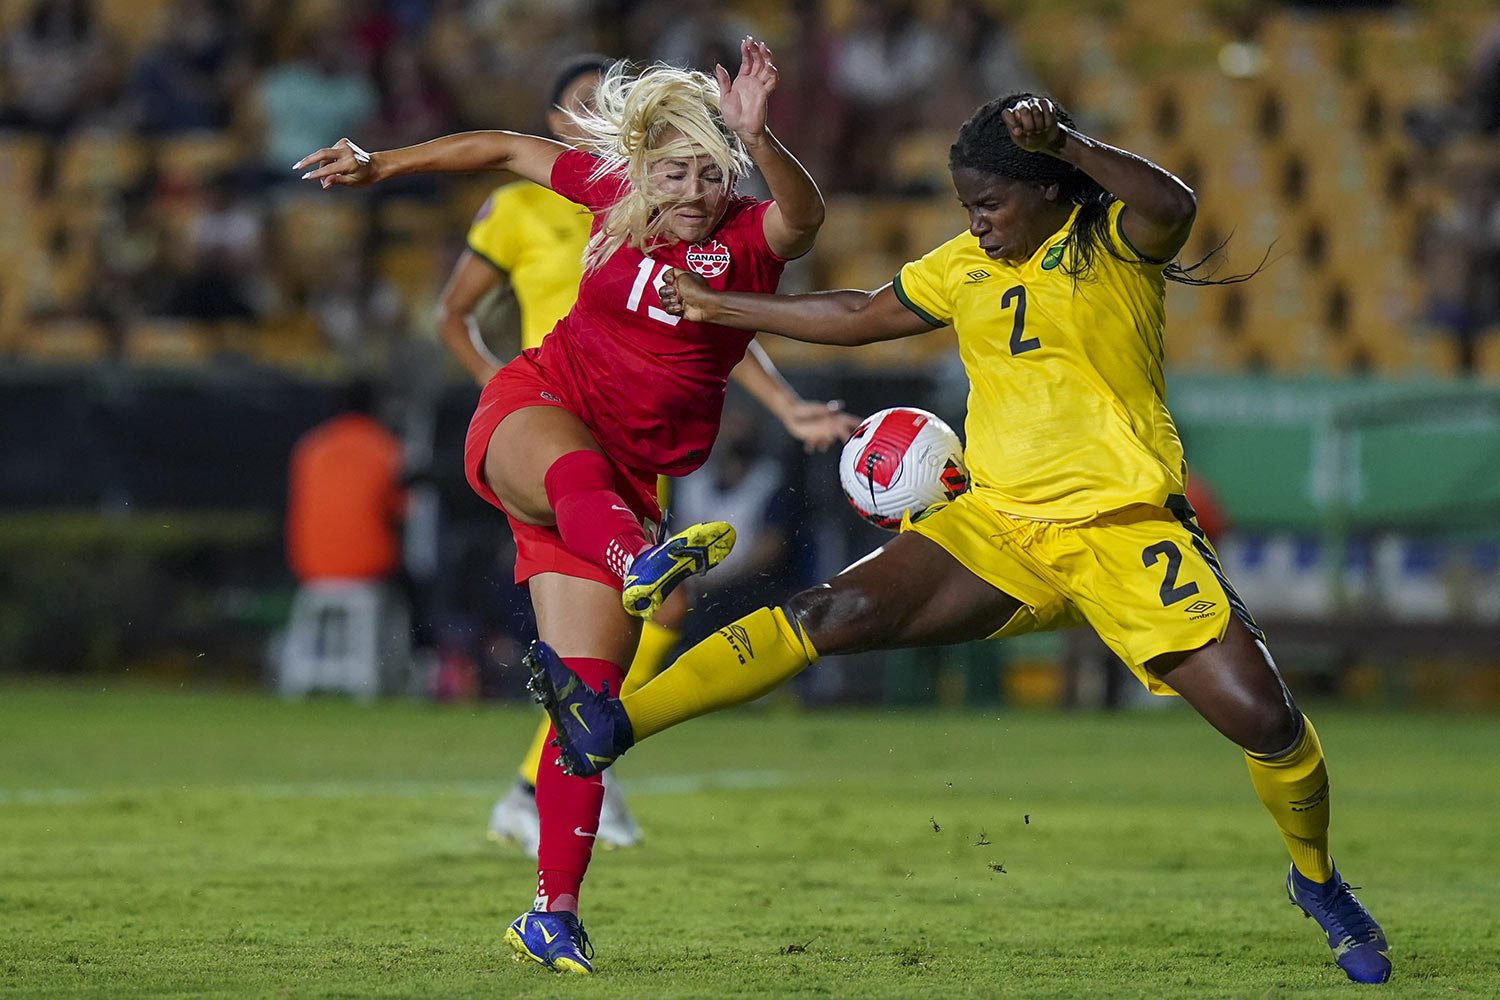  Jamaica's Satara Murray, right, blocks a shot by Canada's Nichelle Prince during a CONCACAF Women's Championship soccer semifinal match in Monterrey, Mexico, Thursday, July 14, 2022. (AP Photo/Fernando Llano) 